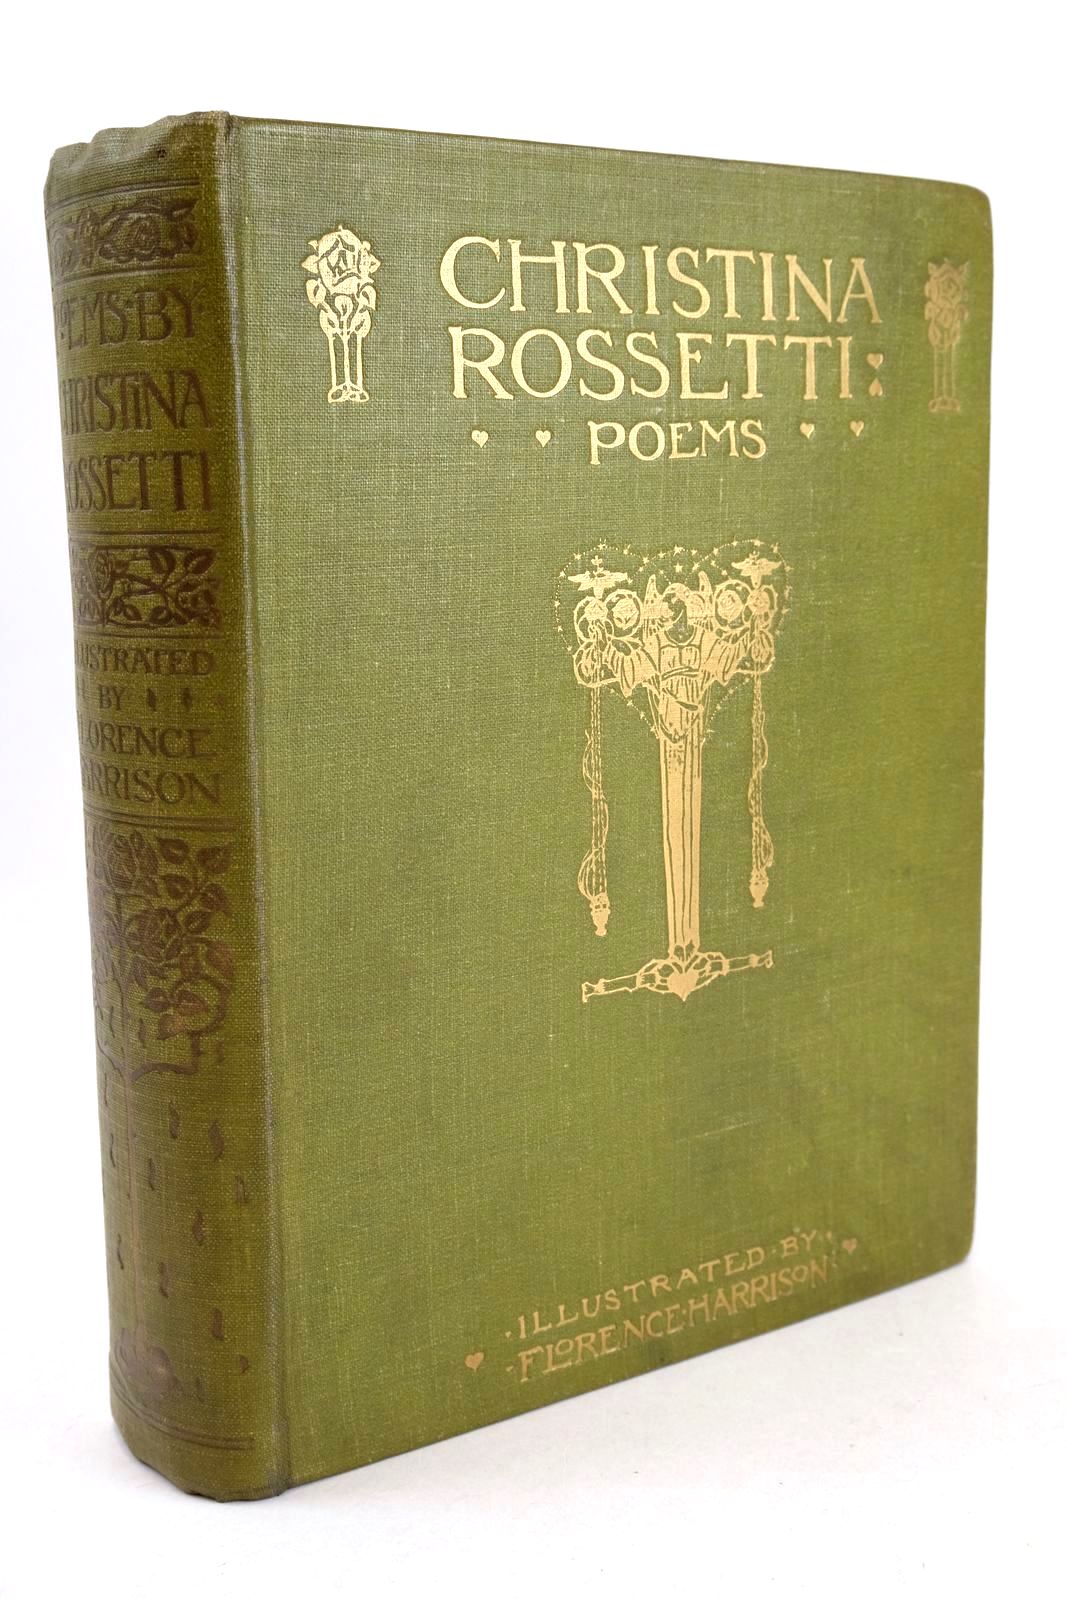 Photo of POEMS BY CHRISTINA ROSSETTI written by Rossetti, Christina illustrated by Harrison, Florence published by The Gresham Publishing Company Ltd. (STOCK CODE: 1326350)  for sale by Stella & Rose's Books